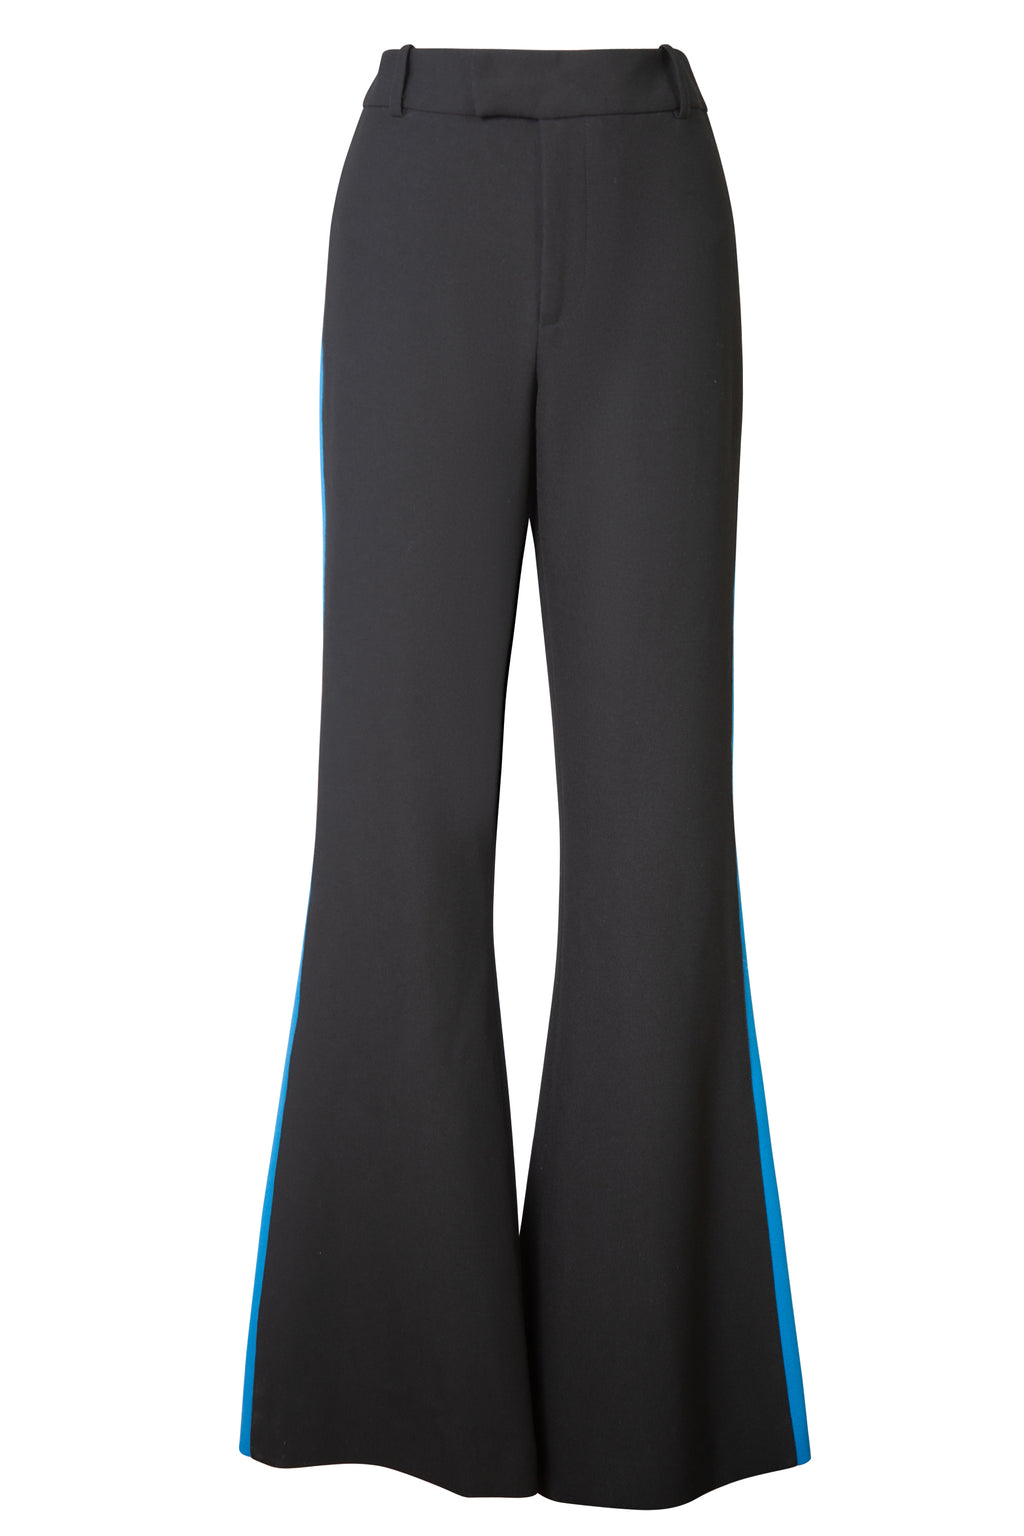 Mugler Blue Embossed Leggings  new with tags (est. retail $720